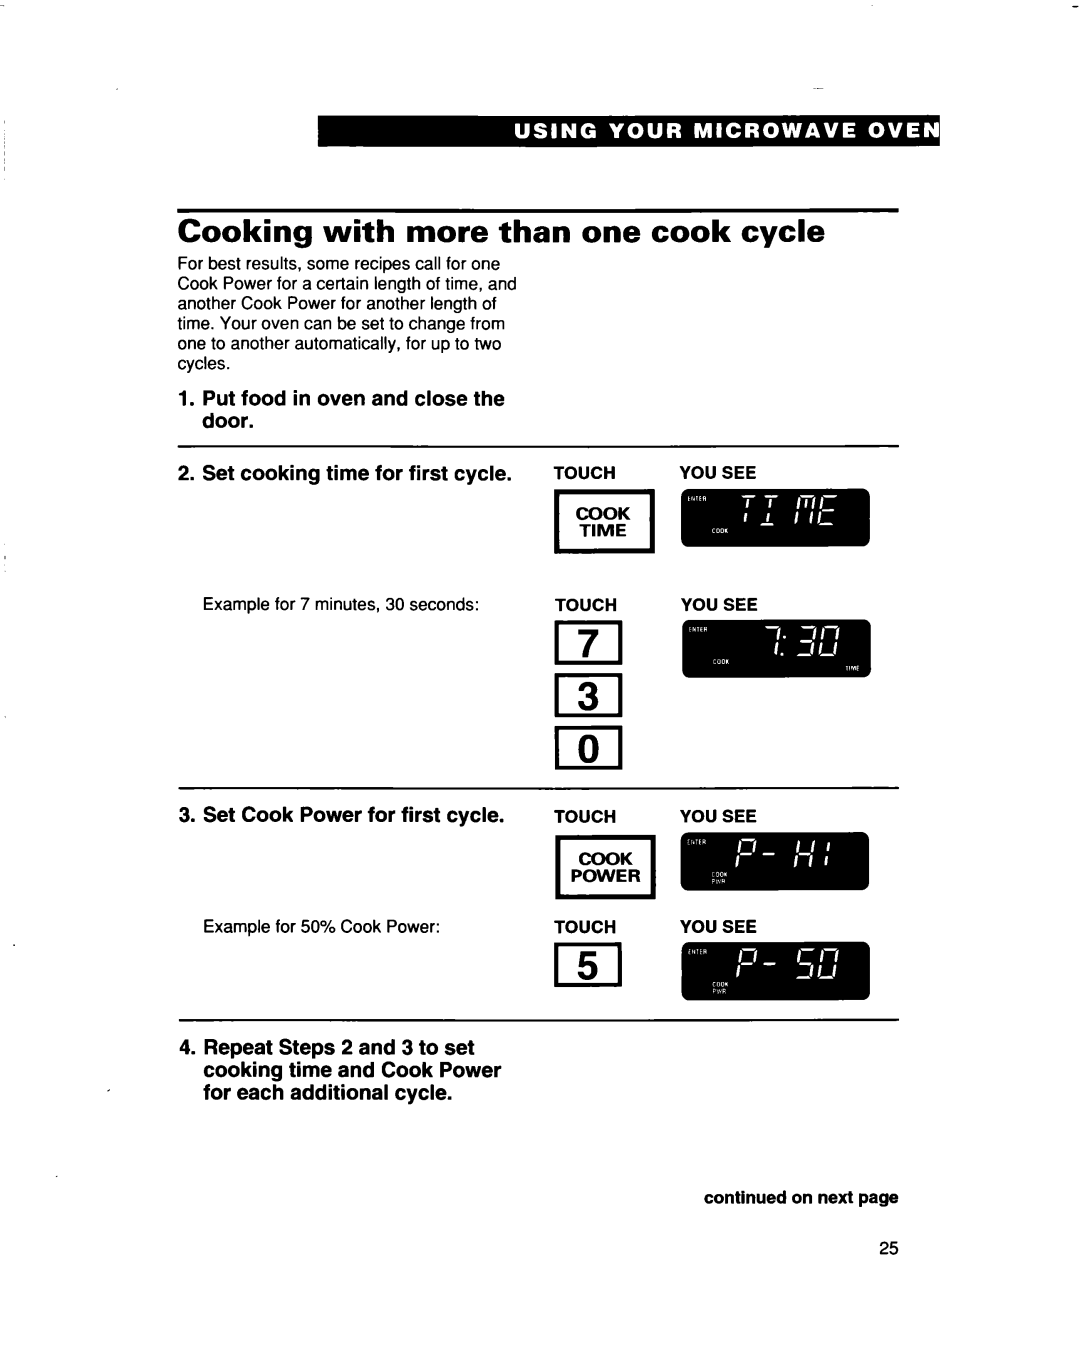 Whirlpool MHEI IRD Cooking with more than one cook cycle, Set cooking time for first cycle, Set Cook Power for first cycle 